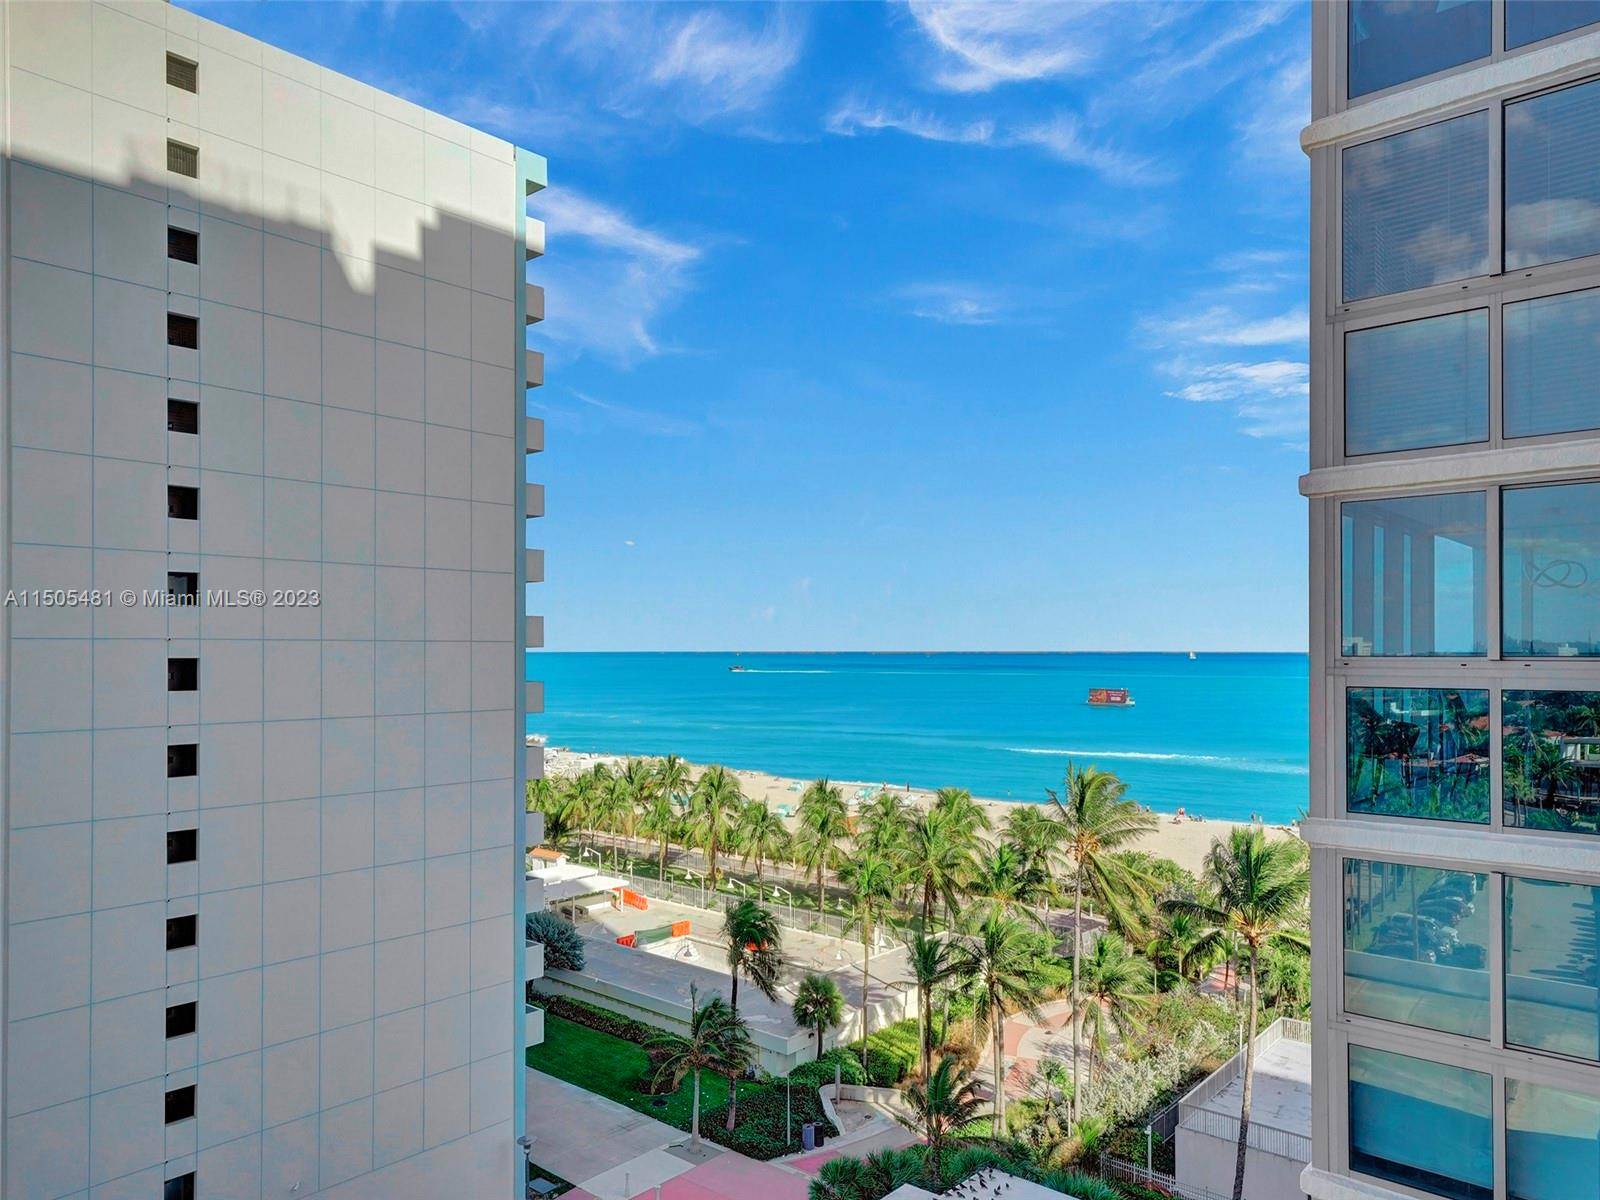 Indulge in Miami Beach living in this oceanfront building with ocean and sunset views from the spacious layout spanning almost 1, 200 sqft.